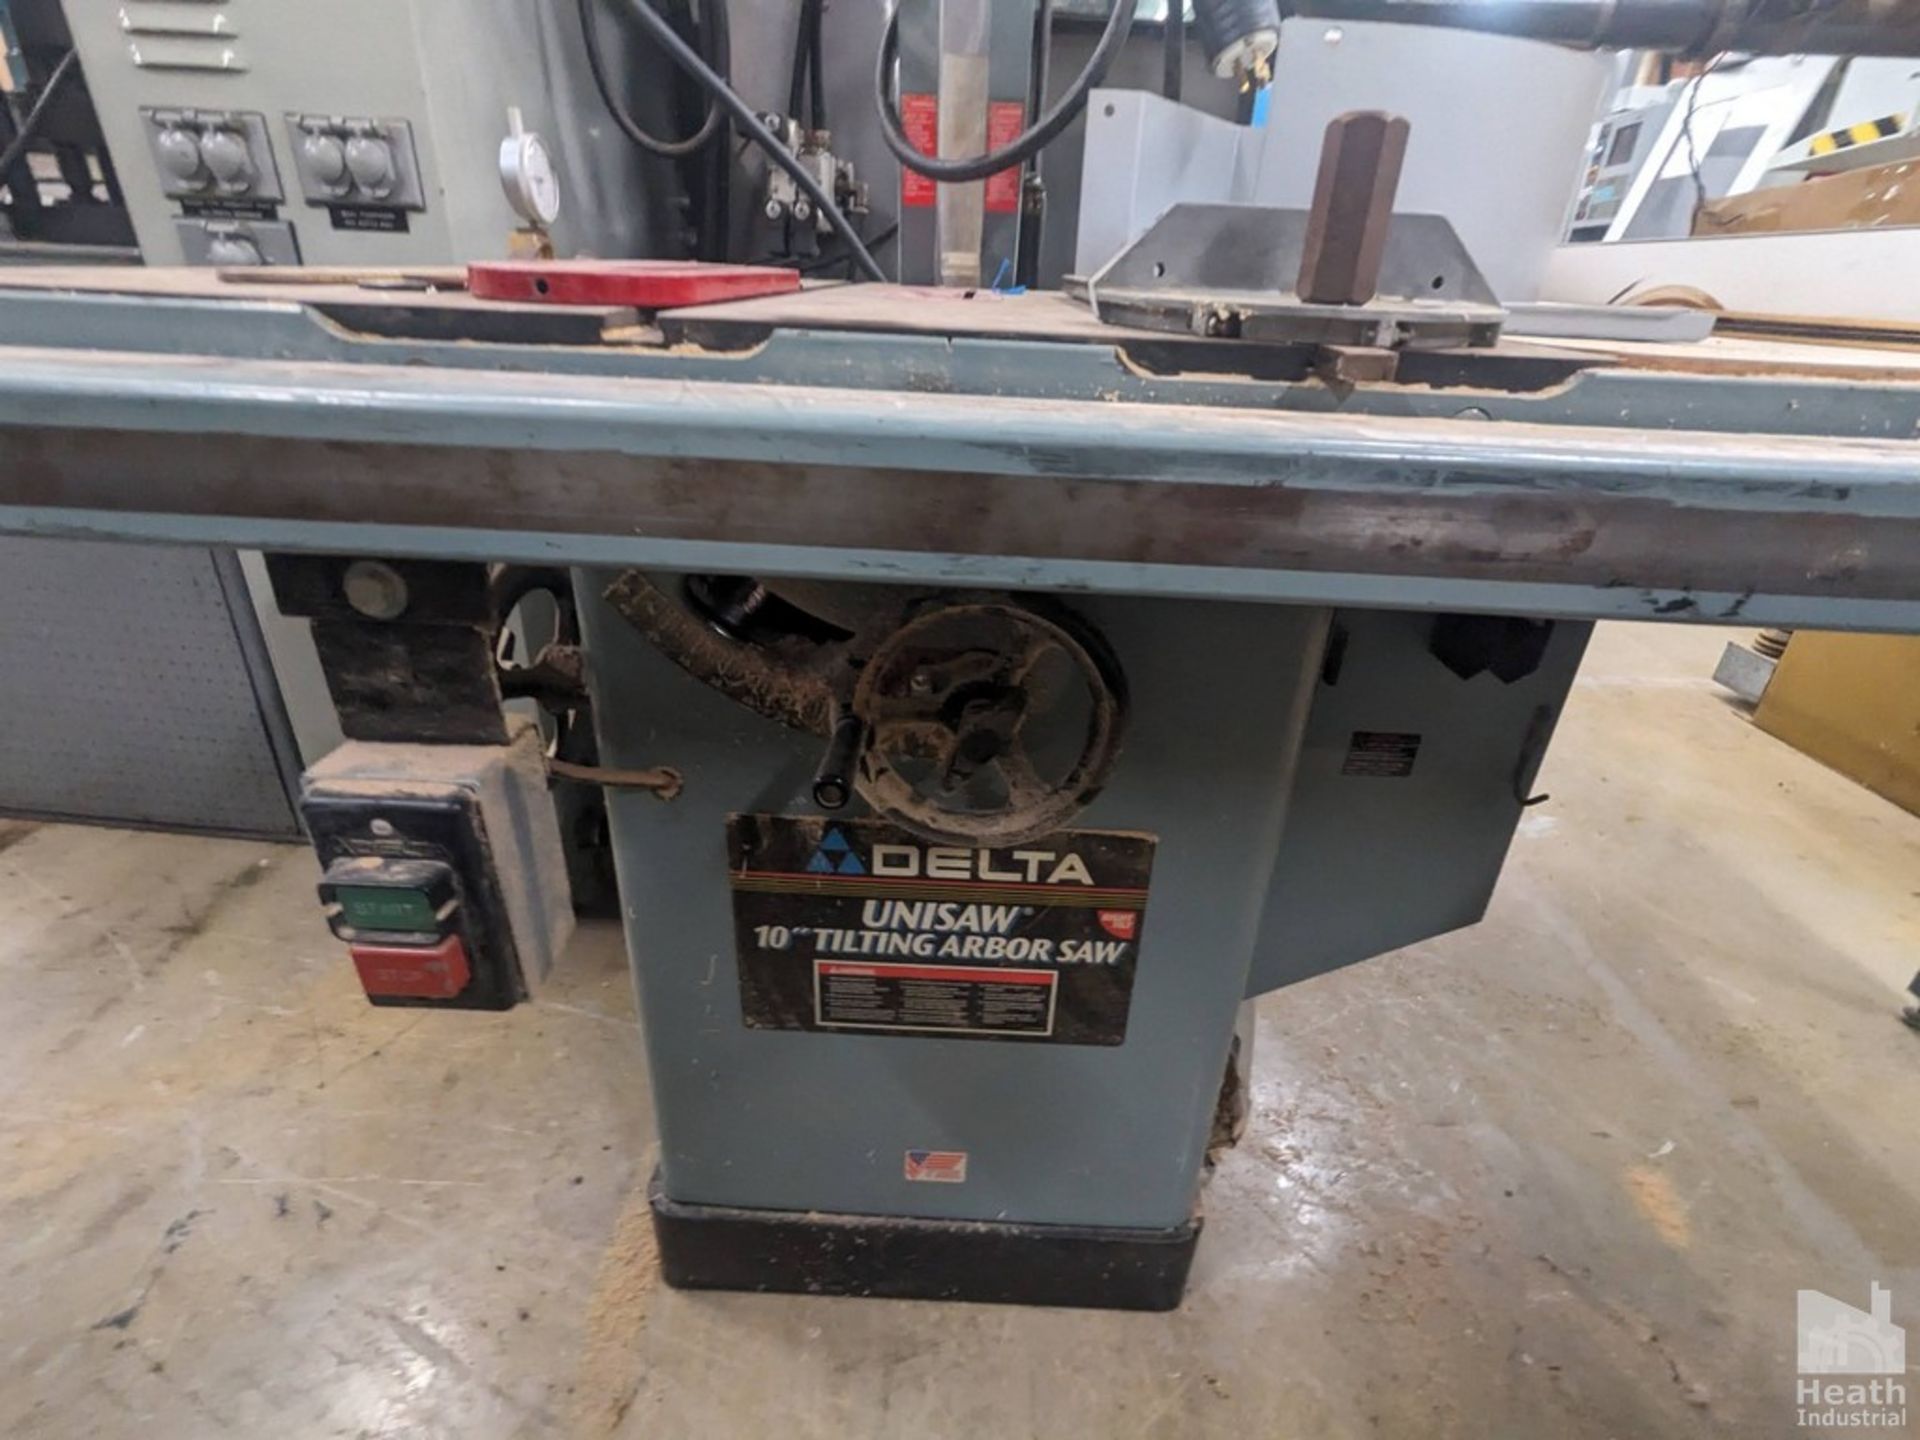 DELTA UNISAW 10" TILTING ARBOR TABLE SAW WITH EXTENDED TABLE BEISEMETER FENCE Loading Fee :$100 - Image 4 of 8